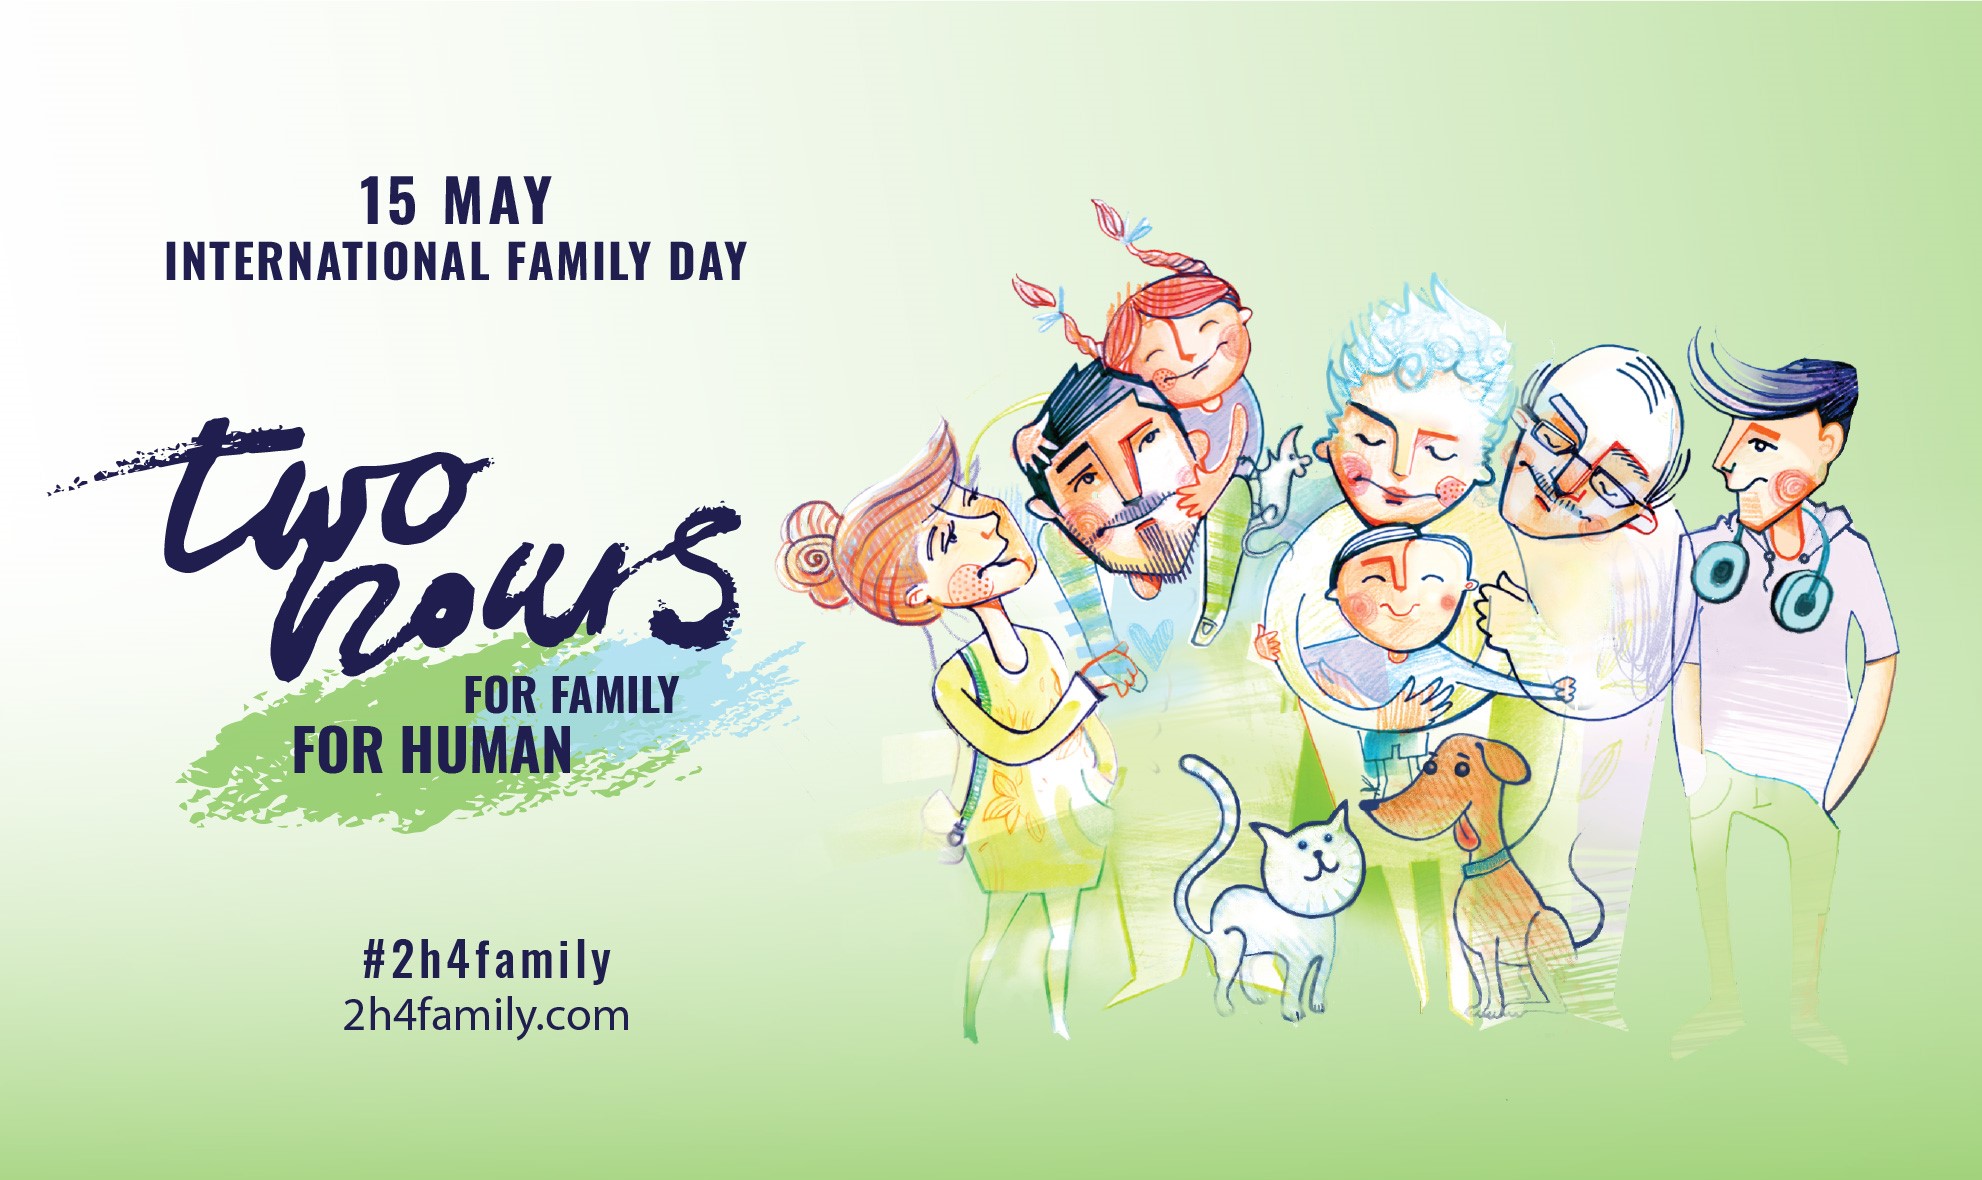 THE TWO HOURS FOR FAMILY CAMPAIGN